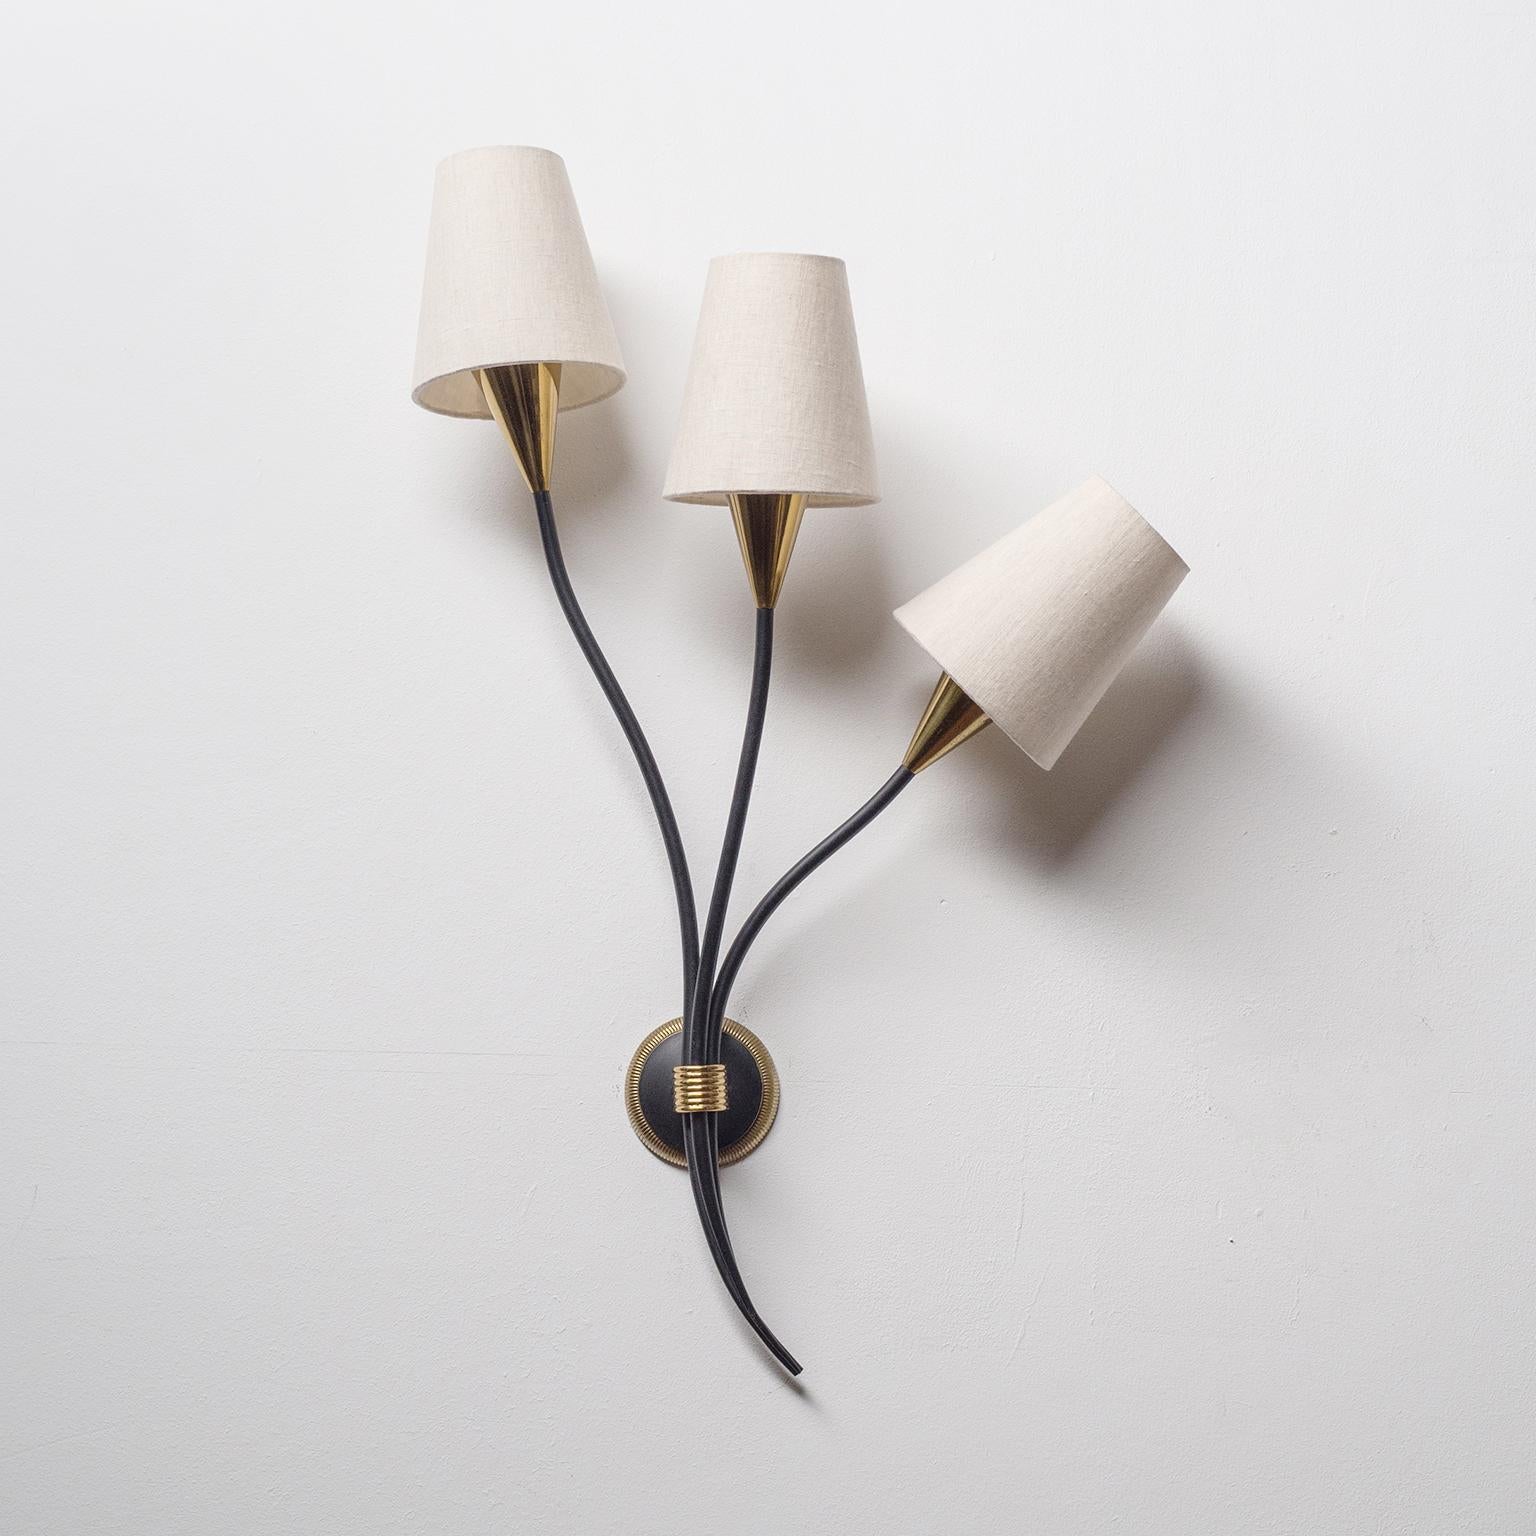 Rare French wall light from the 1950s, attributed to Arlus. Three organically curved arms with original black lacquer. Brass and ceramic E14 sockets with new wiring and linen shades.